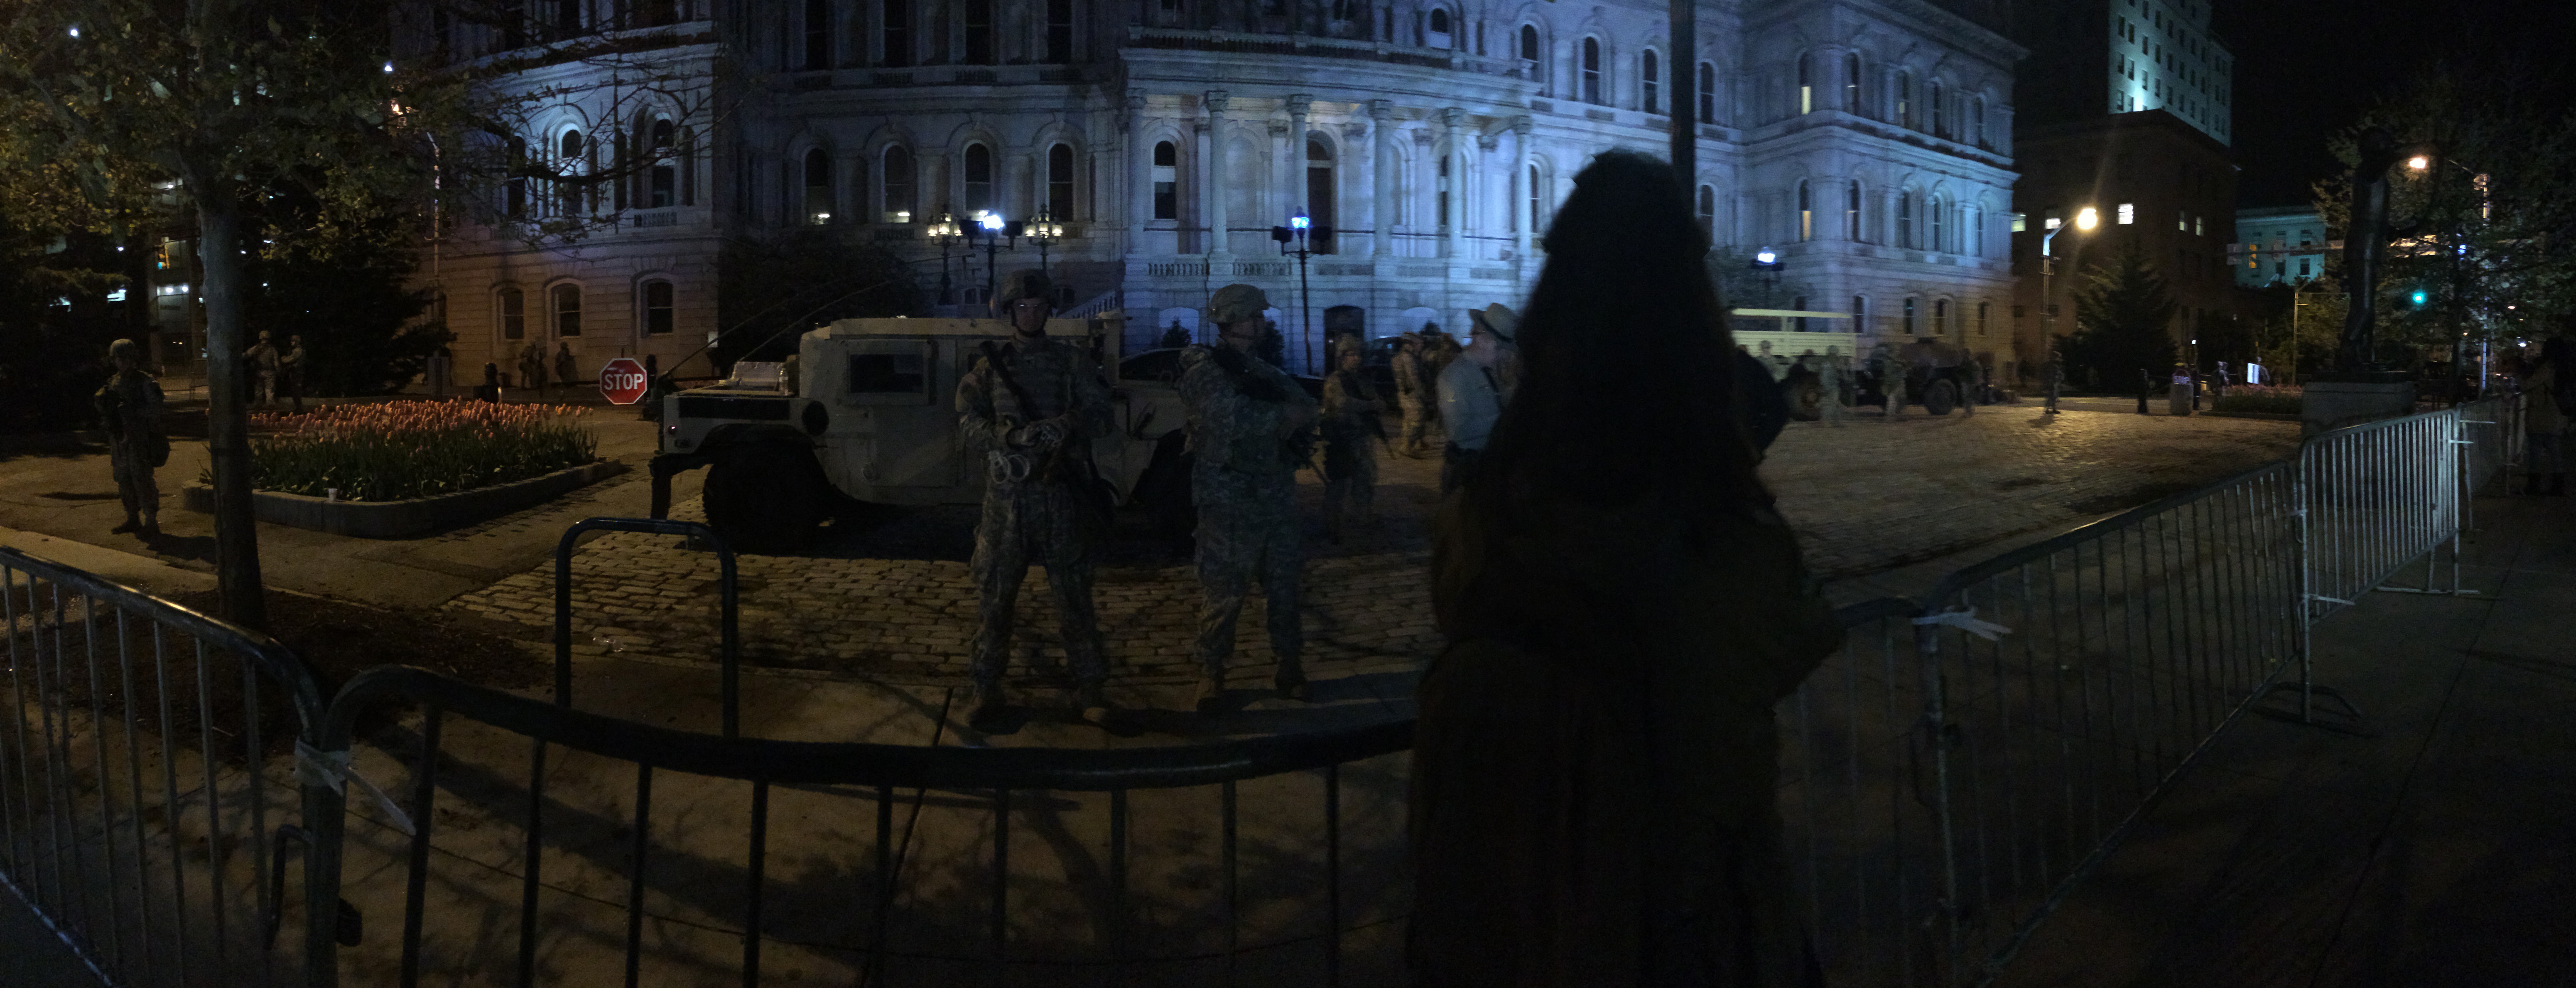 A Medill M.S.J. student documents the presence of Maryland Army National Guard at Baltimore City Hall on April 30, 2015. (Jennifer-Leigh Oprihory/MEDILL NSJI)